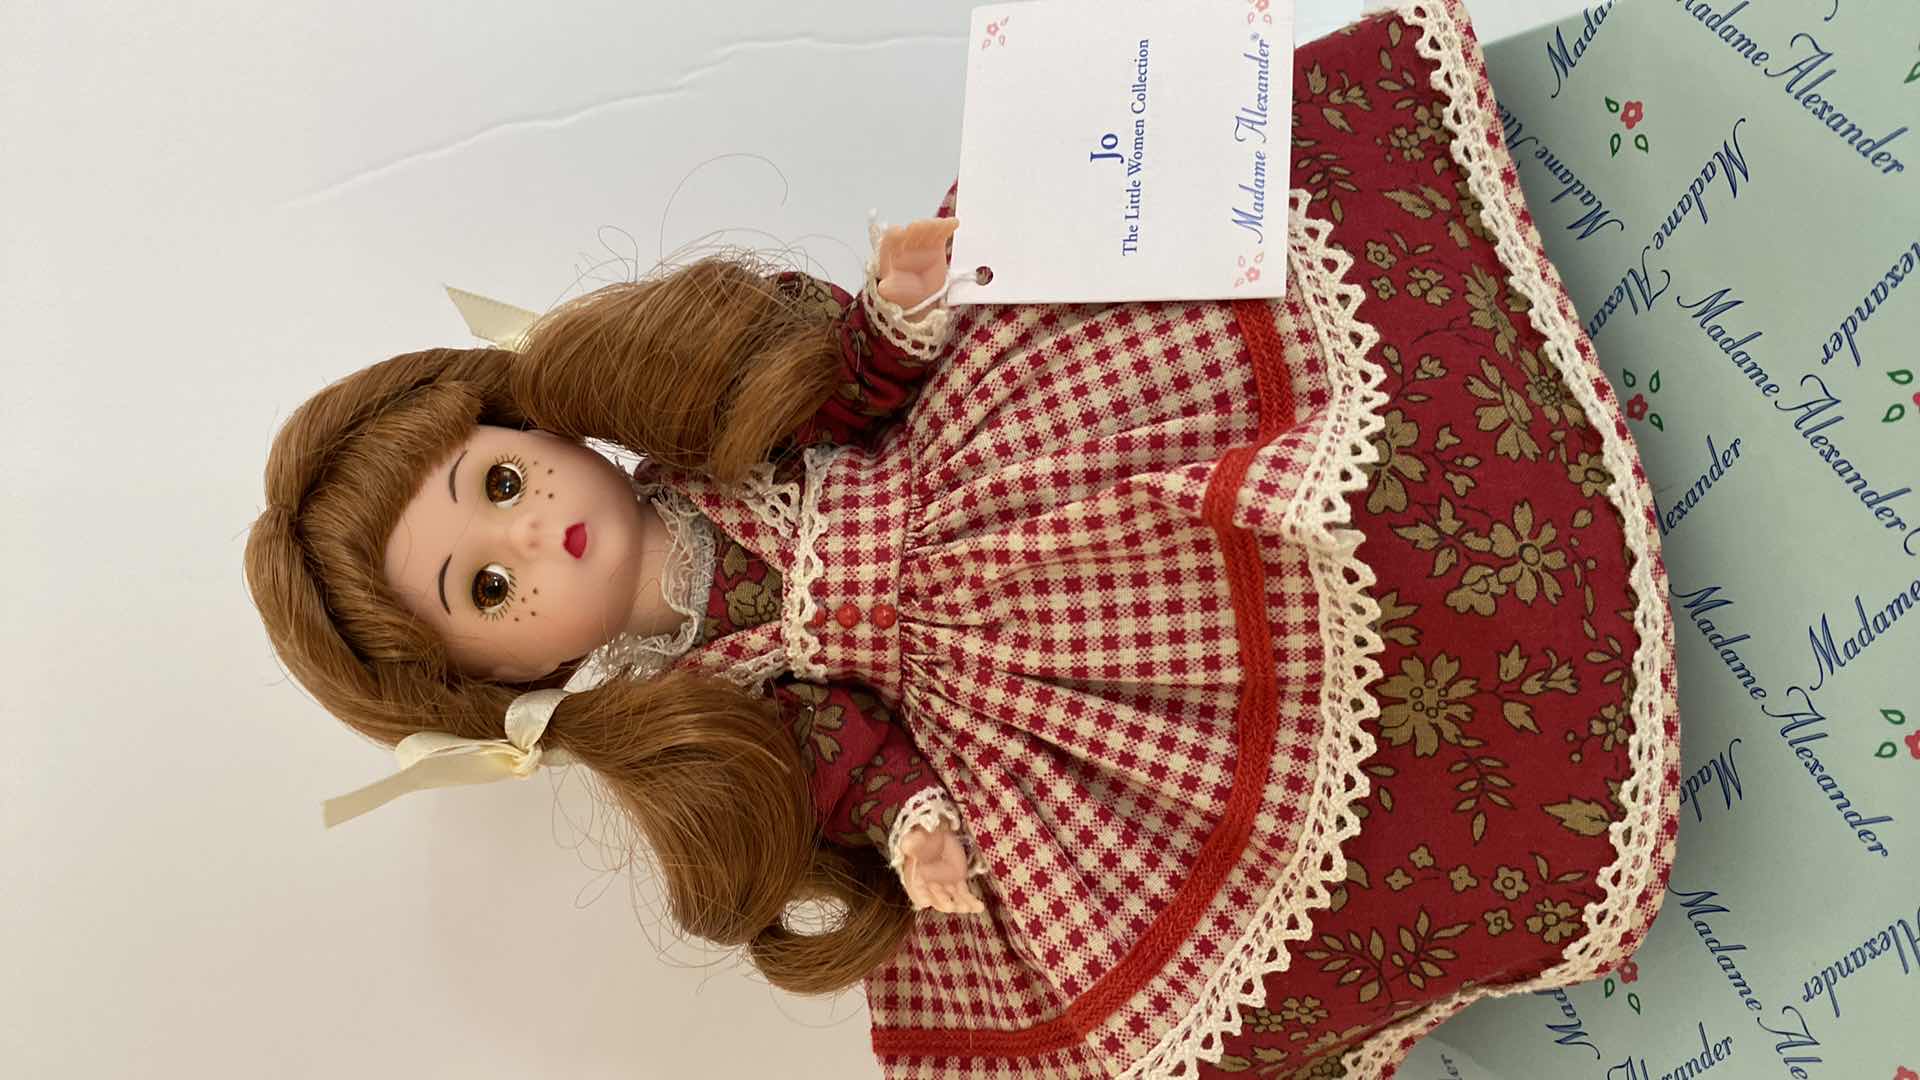 Photo 2 of MADAME ALEXANDER COLLECTIBLE LITTLE WOMEN JO 28140 H8” FROM FAO SCHWARZ WITH BOX